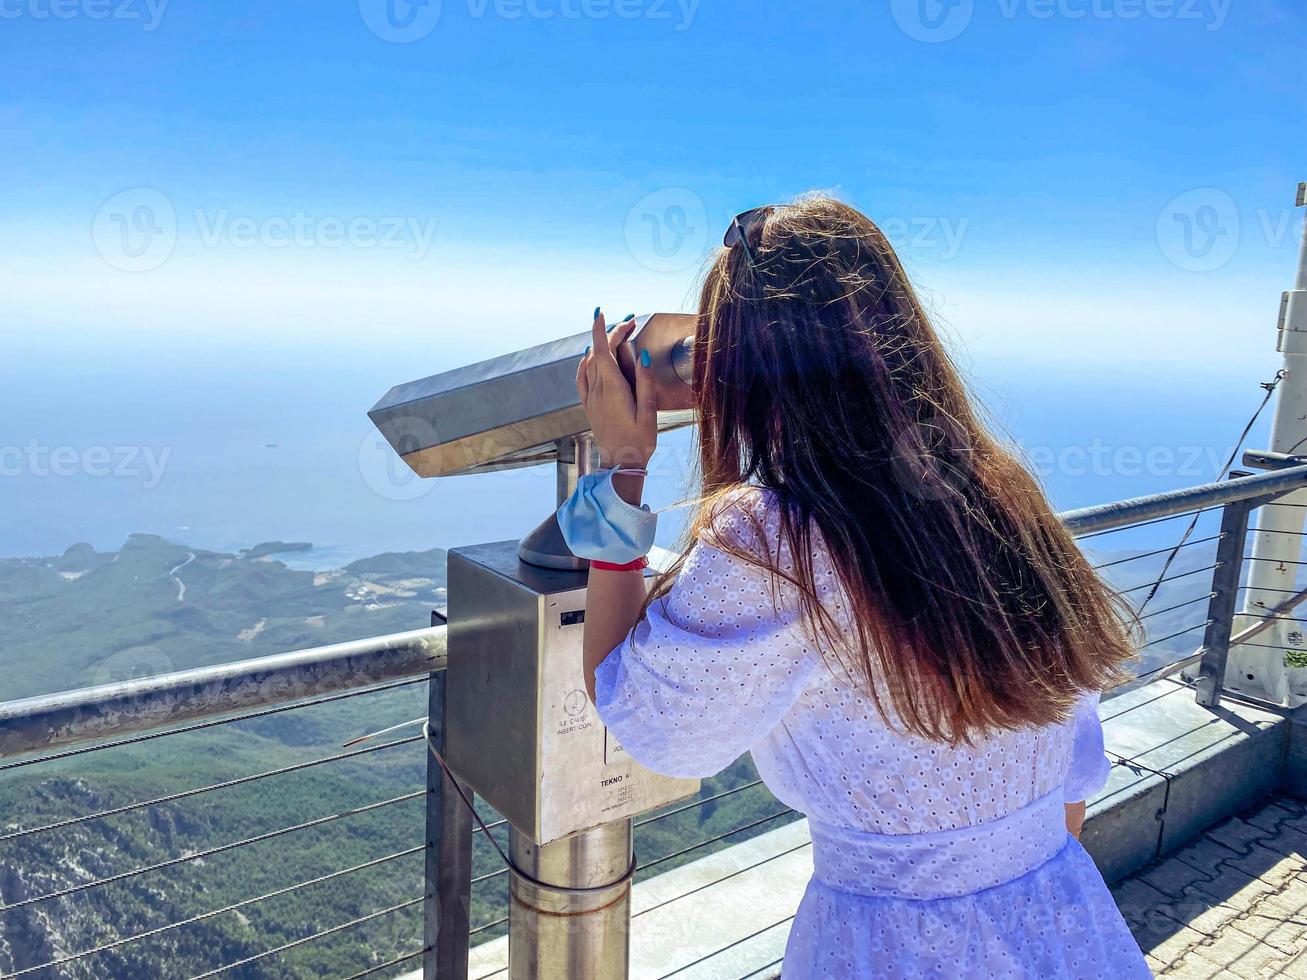 a girl in a white dress with long hair looks through binoculars on an observation platform. sightseeing tour, curious tourist photo